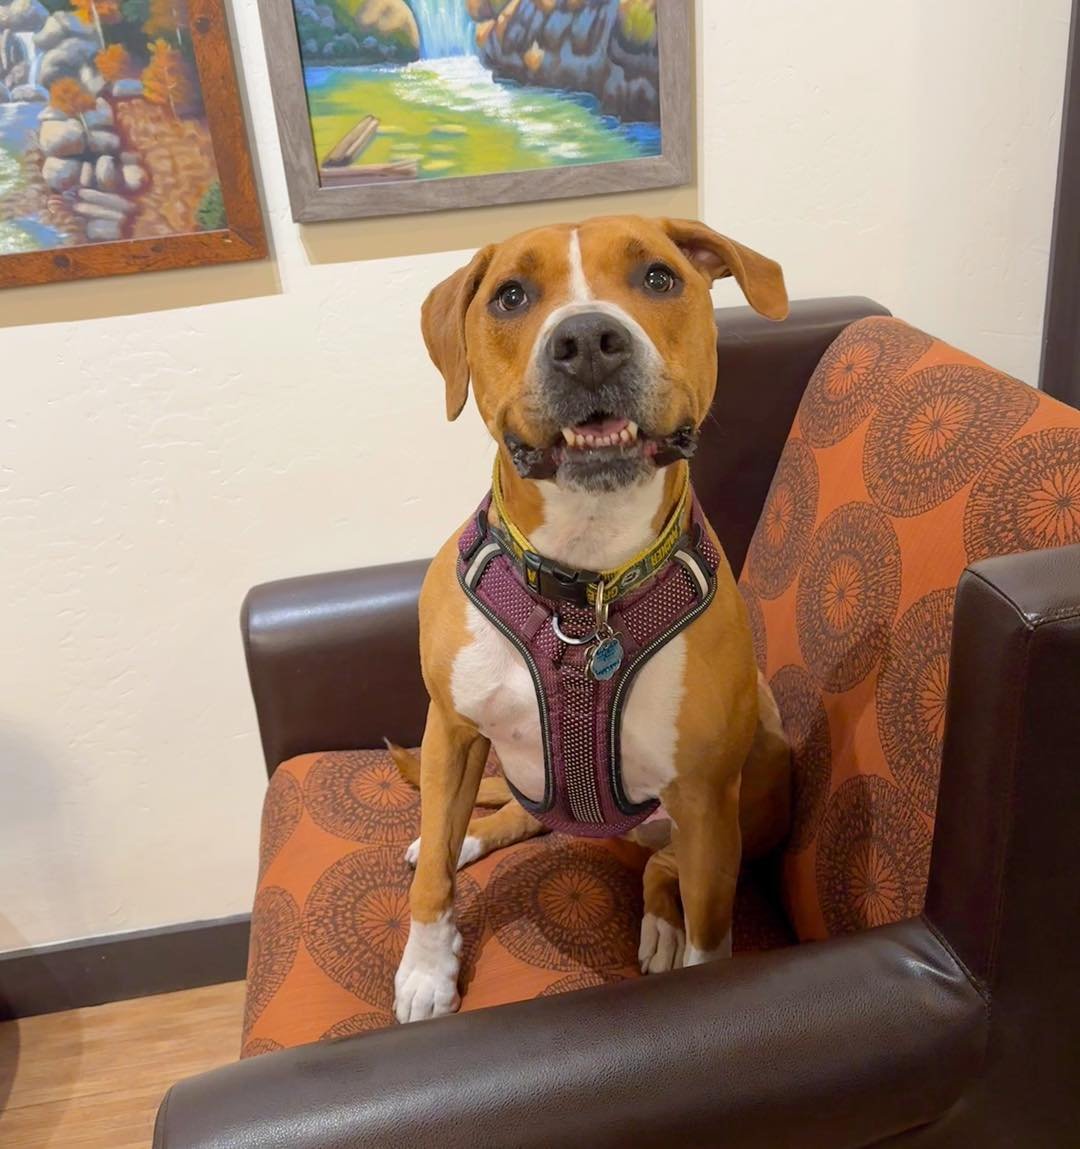 🐾🌟Meet Charlie, our Dog of the Month for May at MeCo Coffee Collective!🌟🐾

Charlie belongs to our barista / cheesy bits maker, Sam!  She loves to snuggle, visit her friends at Meco, and whipped cream! 
She may not make yummy food and drinks, but 